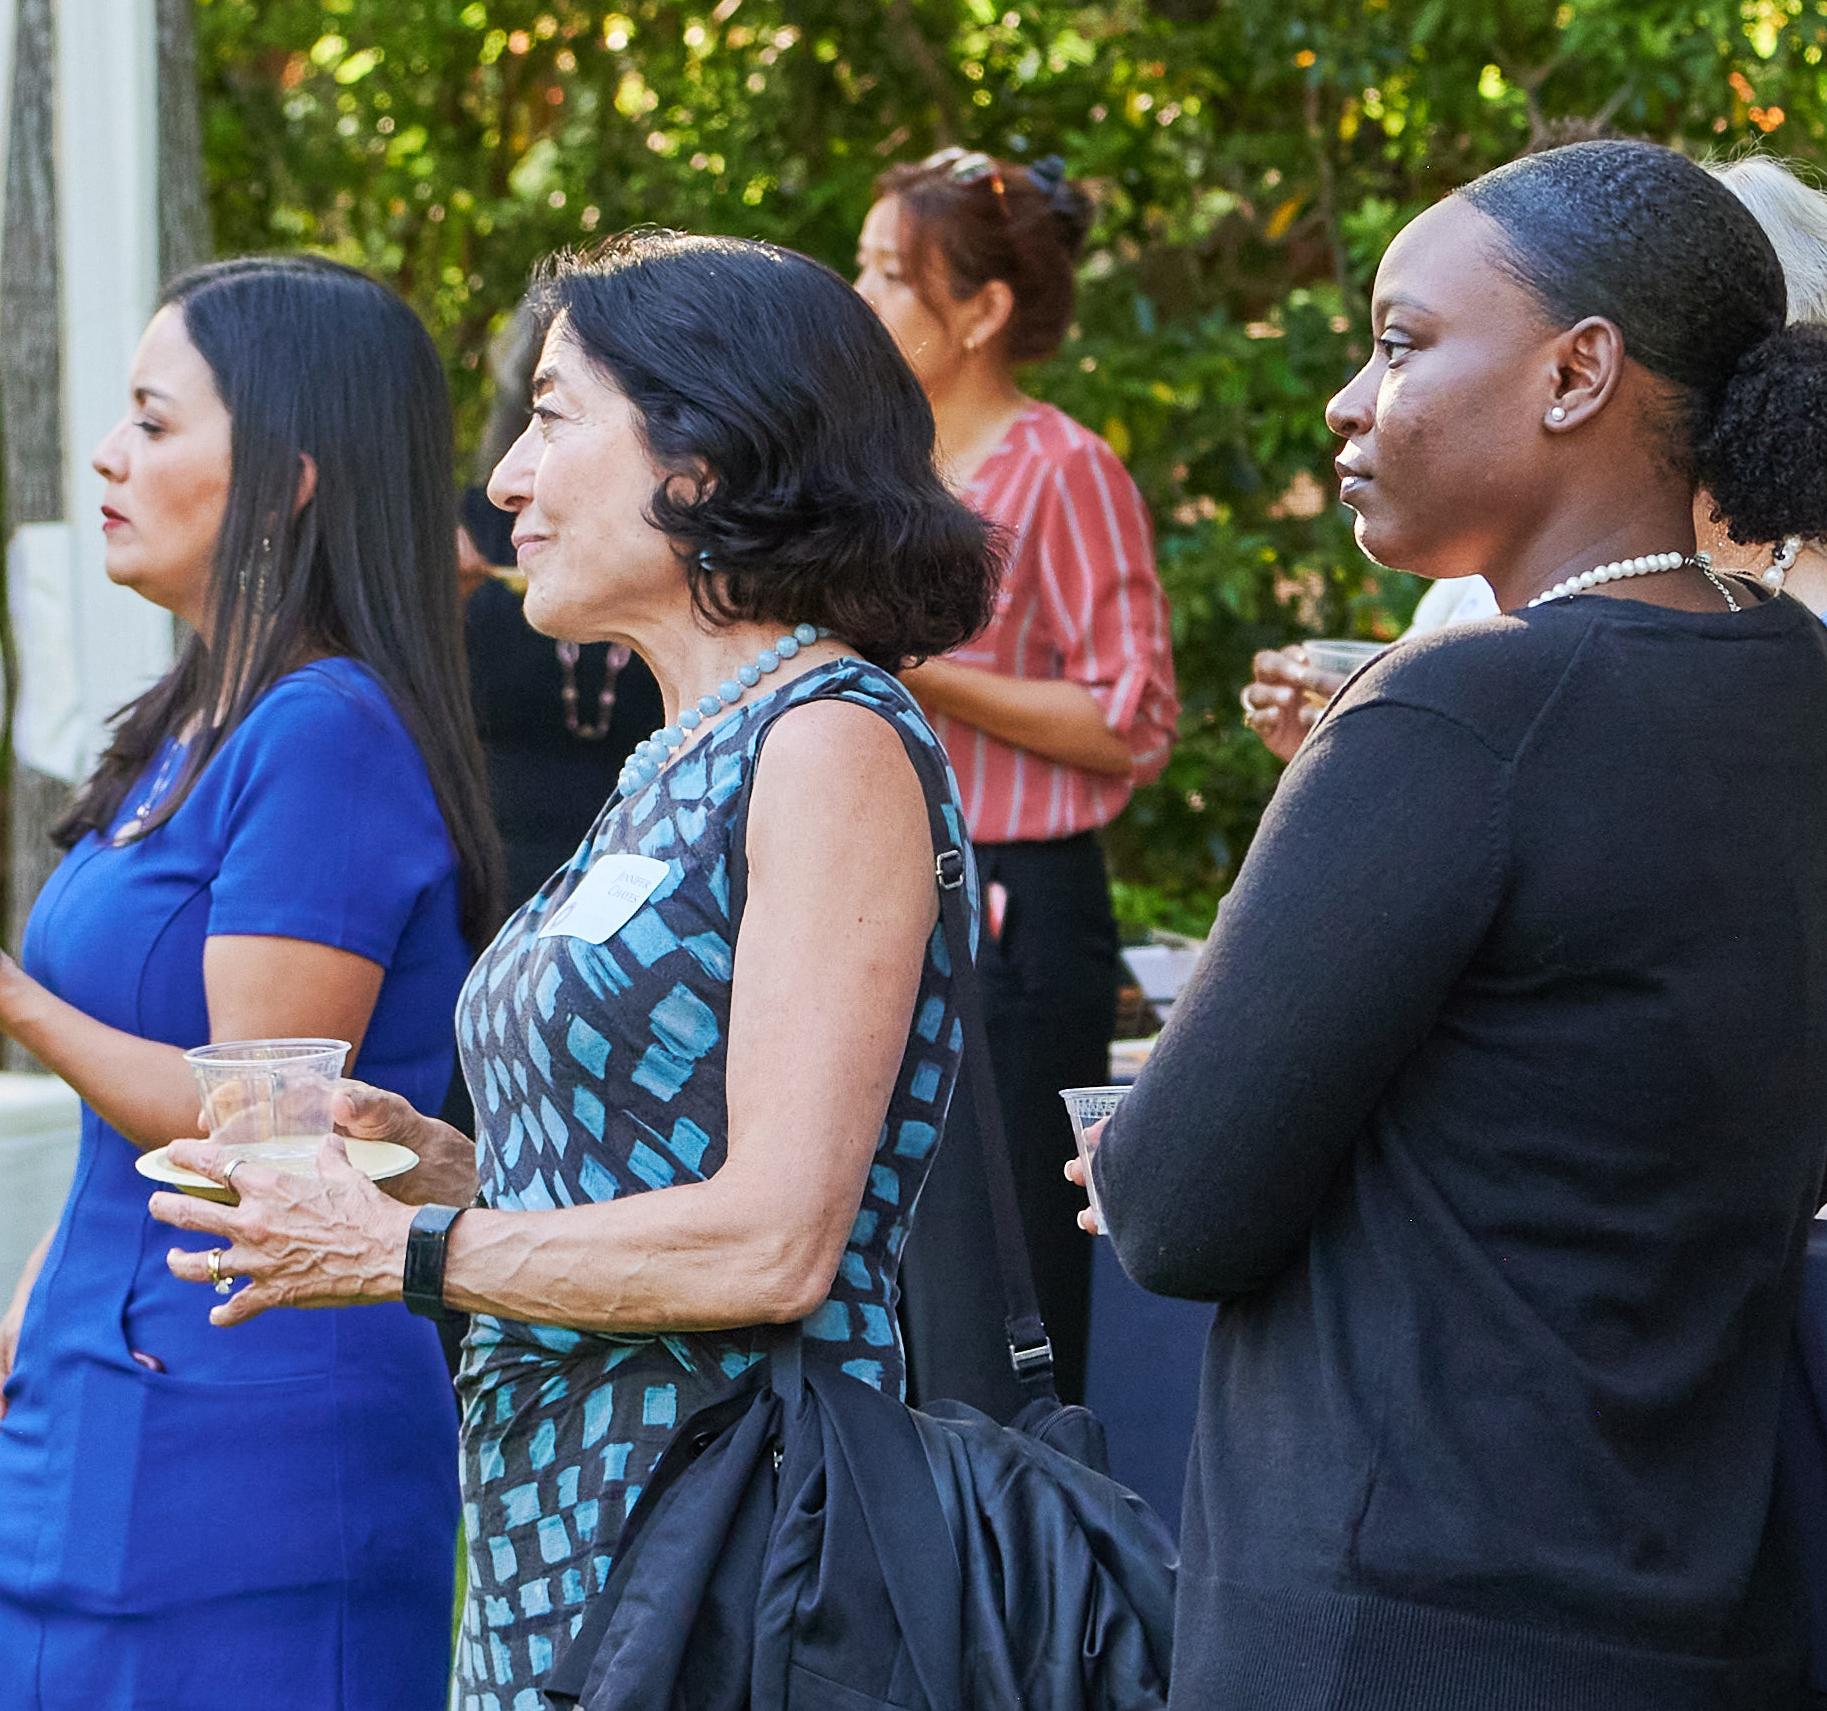 Yasmeen Rawajfih (left), assistant professor of computer science at Tuskegee, Jennifer Chayes (center), associate provost at CDSS, and Tuskegee Scholar Bianca Alcéna at the reception. (Photo/ KLCfotos)